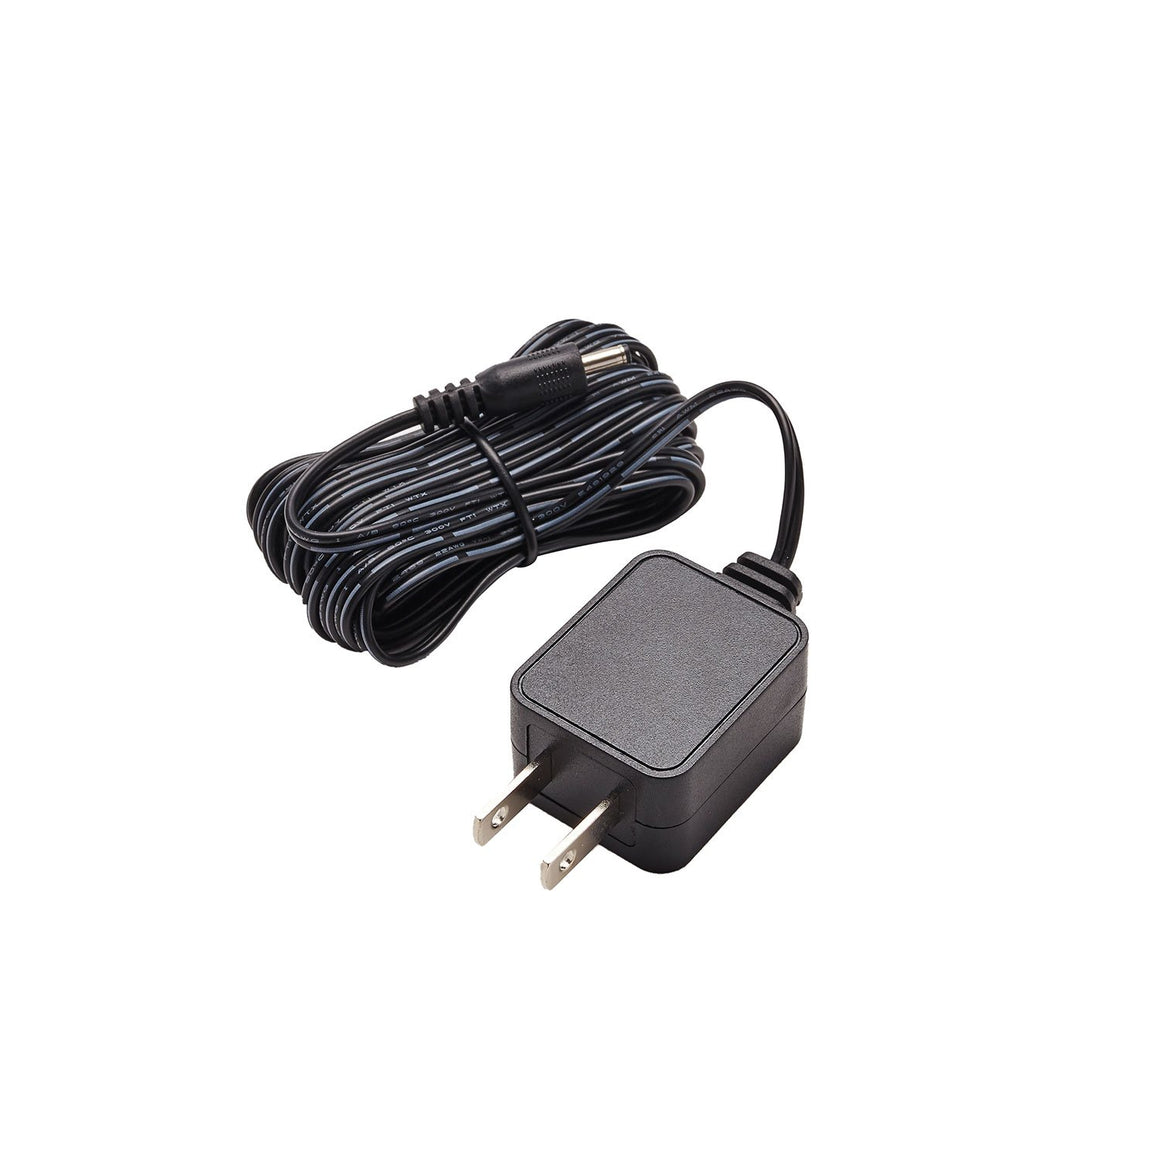 MIGHTY BRIGHT LEDACADAPTER AC Adapter for LED Lights for USA 36903